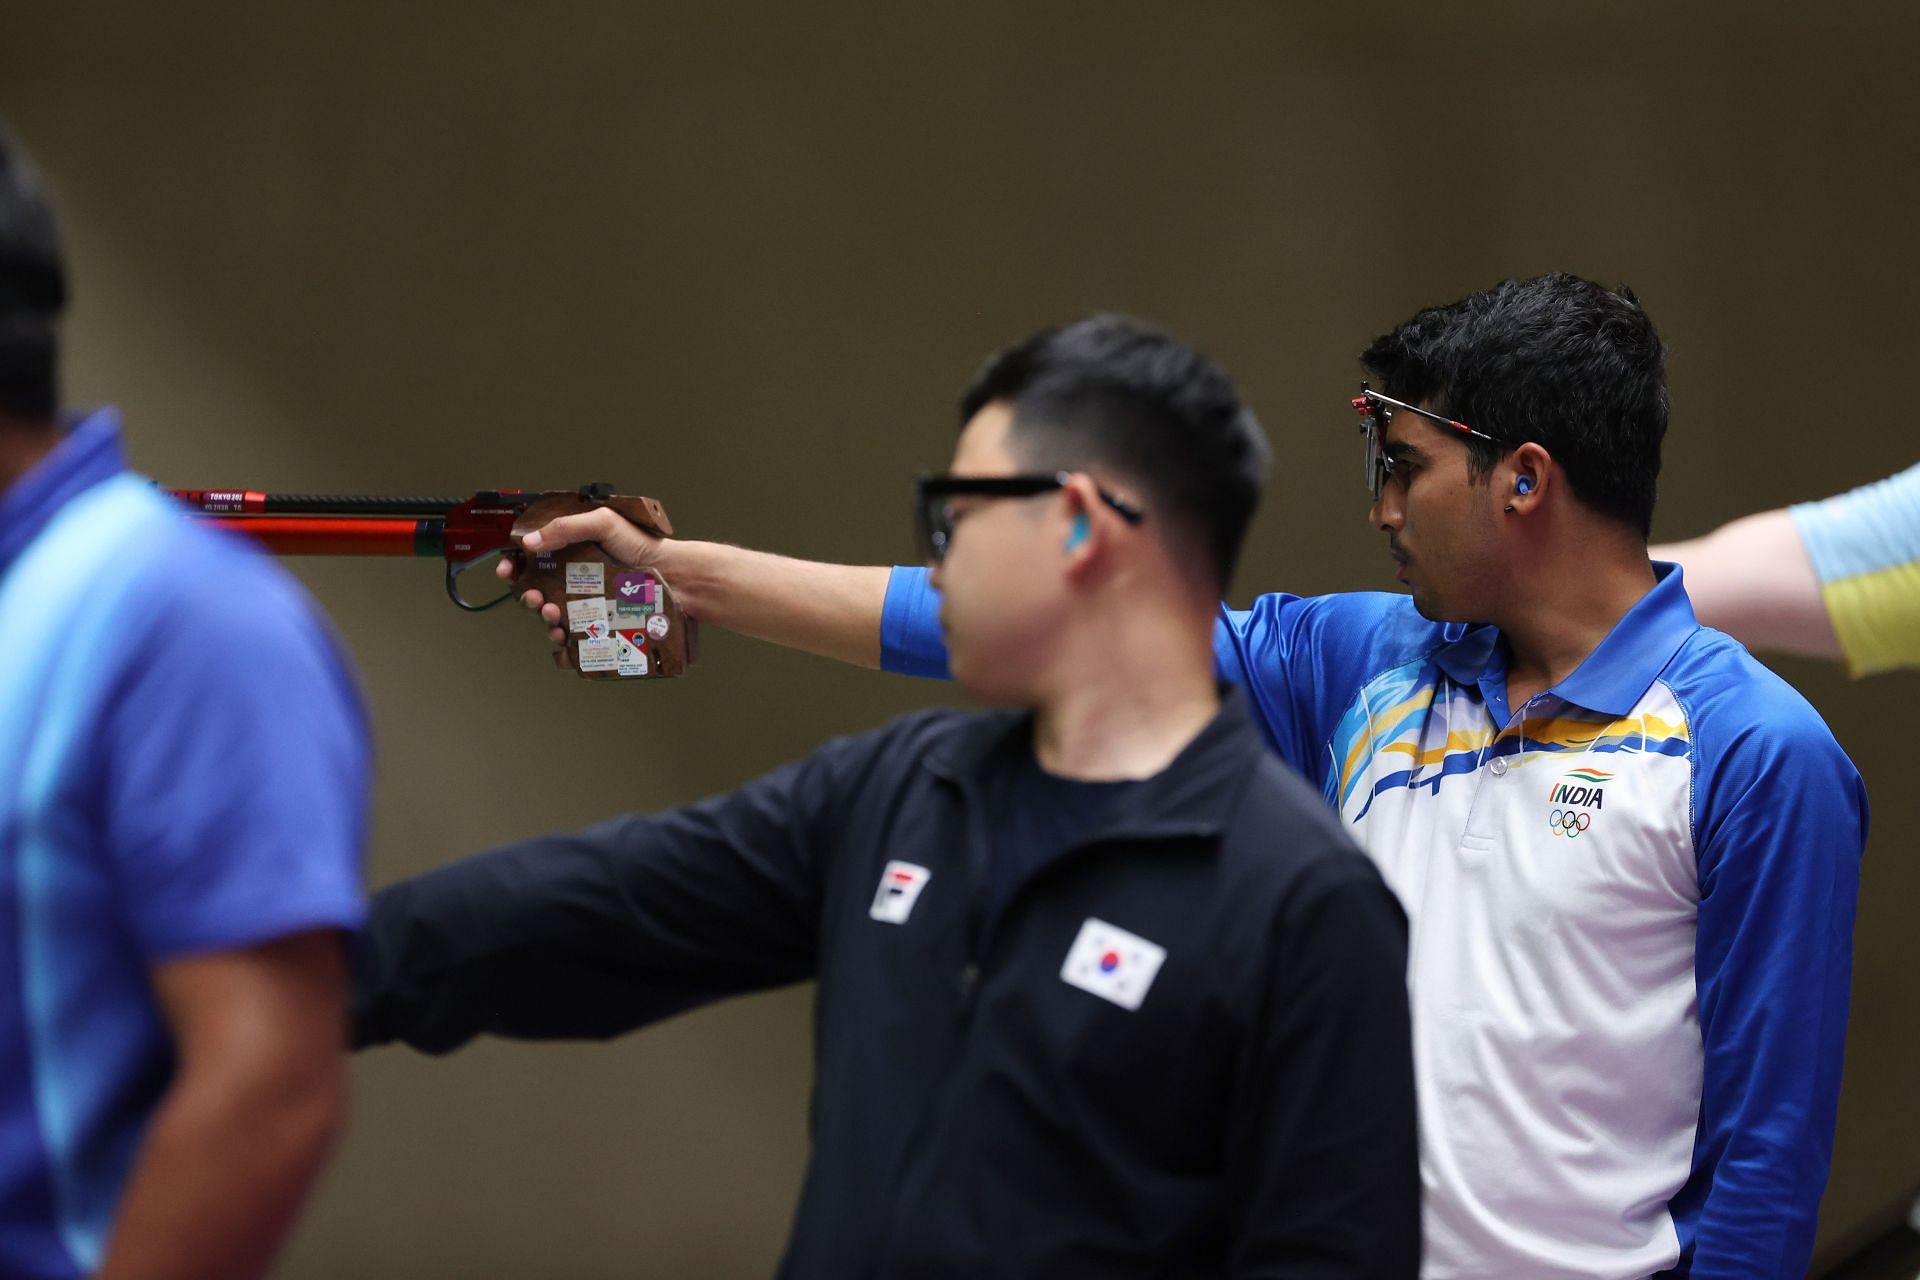 Saurabh Chaudhary will be in action in 10m air pistol event.